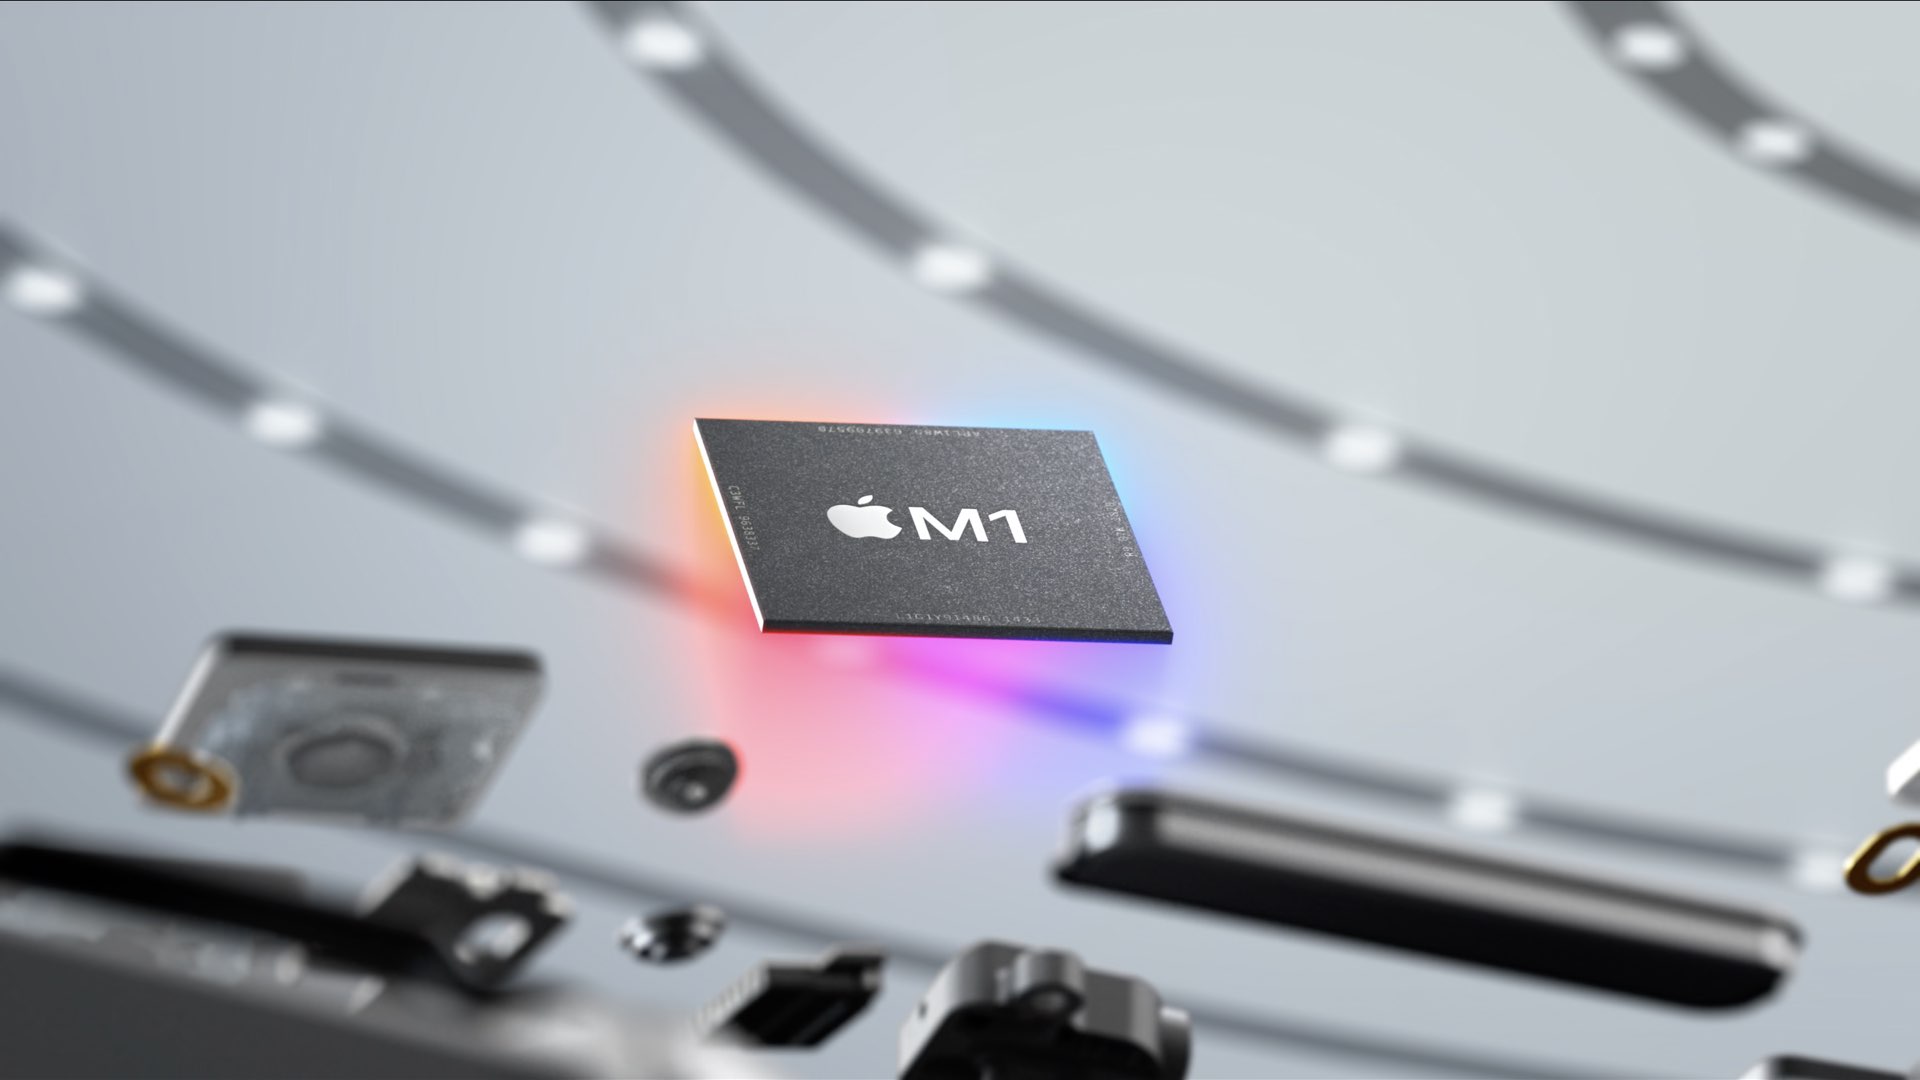 Apple is working on M1 successors for 2021 iMac &amp; MacBook Pro, 32-core Mac Pro in 2022